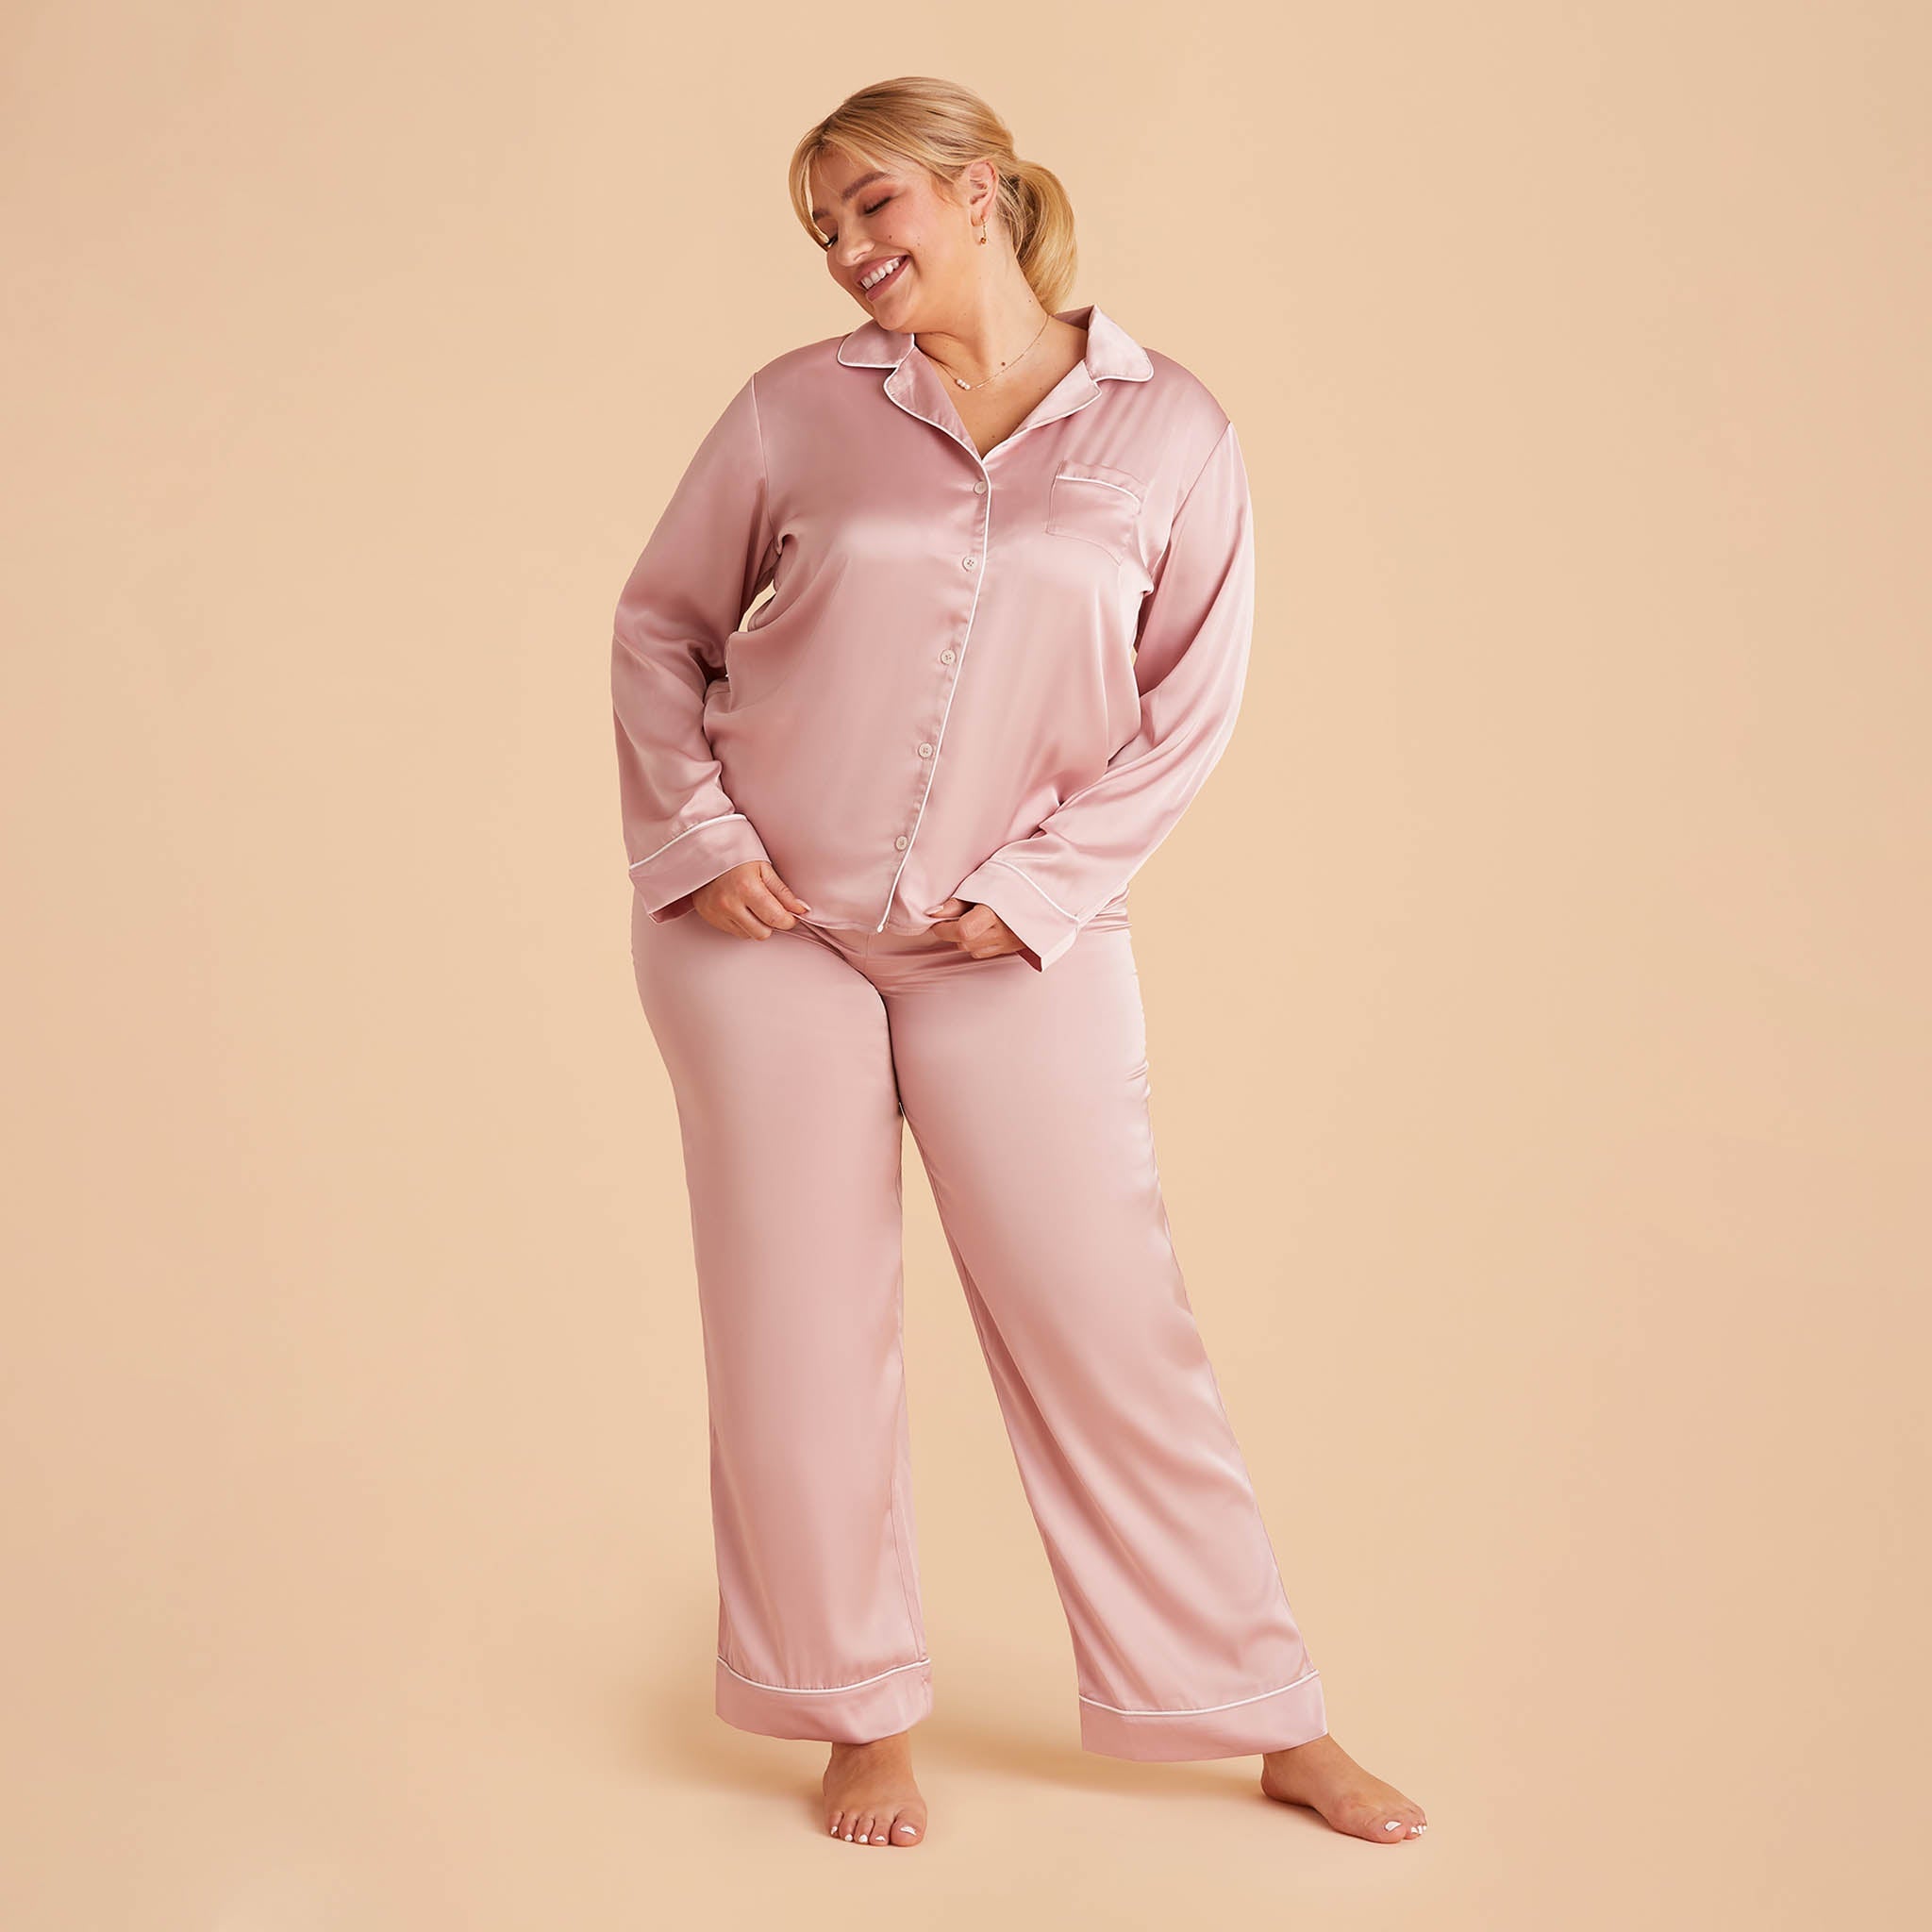 Jonny Plus Size Satin Long Sleeve Pajama Top With White Piping in dusty pink, front view